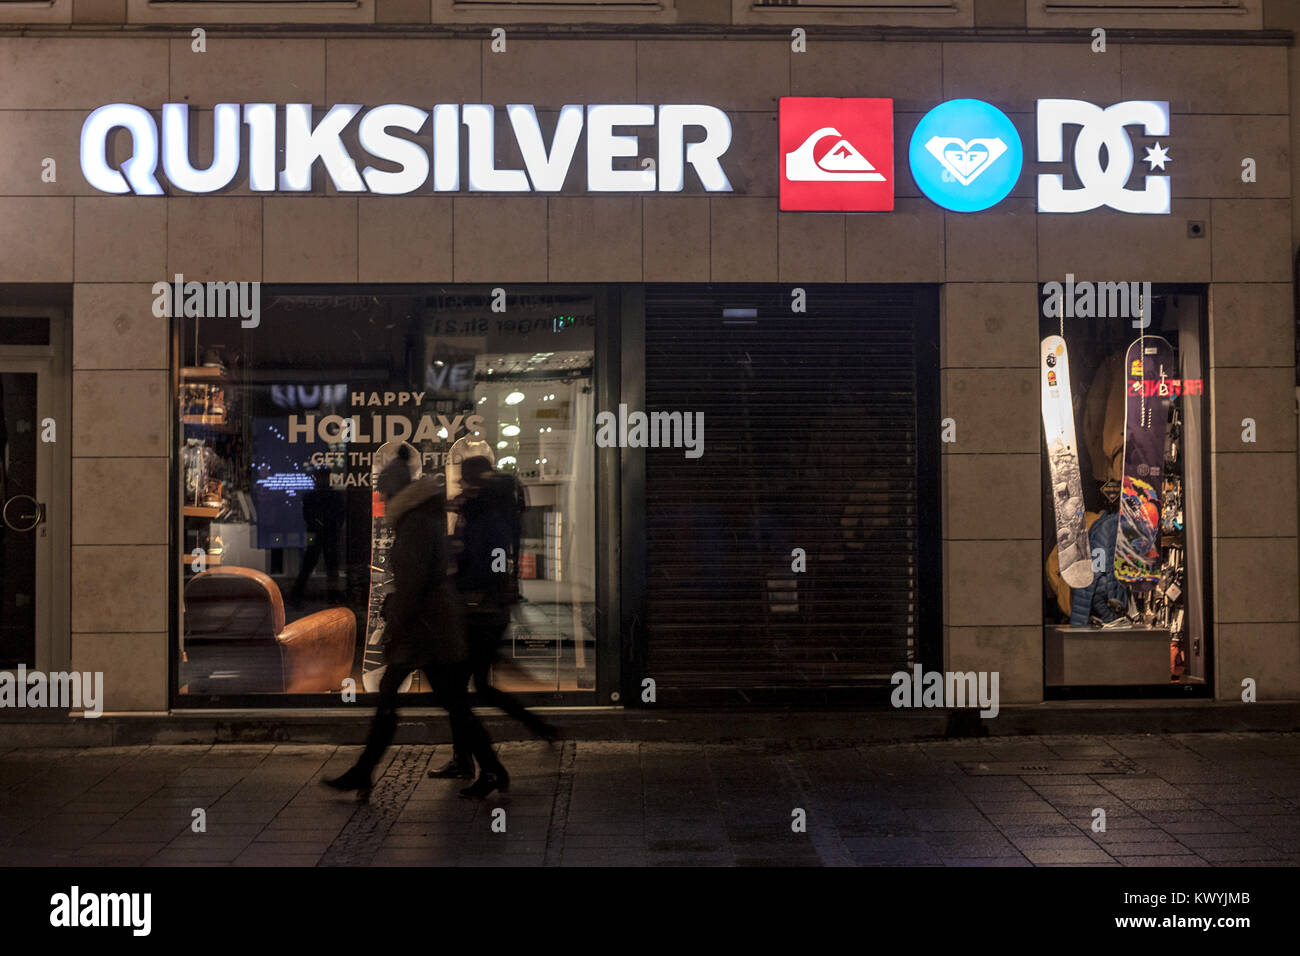 MUNICH, GERMANY - DECEMBER 17, 2017: Quicksliver logo on their Munich main shop taken at night. Quiksilver is an American retail sporting company  Pic Stock Photo